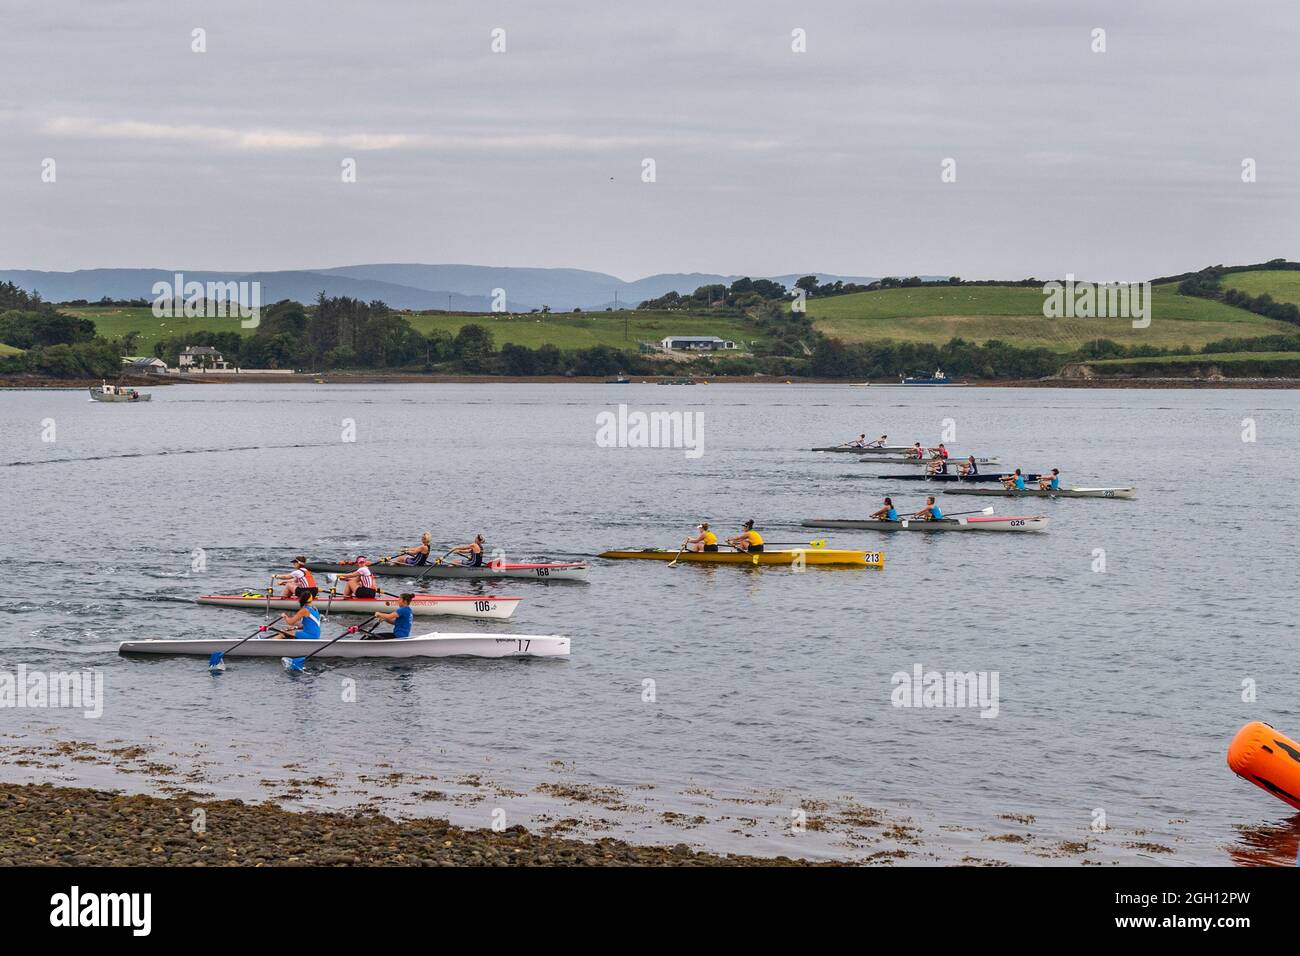 Bantry, West Cork, Ireland. 4th Sep, 2021. Rowing Ireland is holding the national offshore rowing championships in Bantry this weekend. The event, hosted by Bantry Rowing Club, is being contested by 30 rowing clubs from around Ireland. Boats prepare for the first race of the day, the women's doubles, which was won by Castletownsend 'C' team. Credit: AG News/Alamy Live News Stock Photo